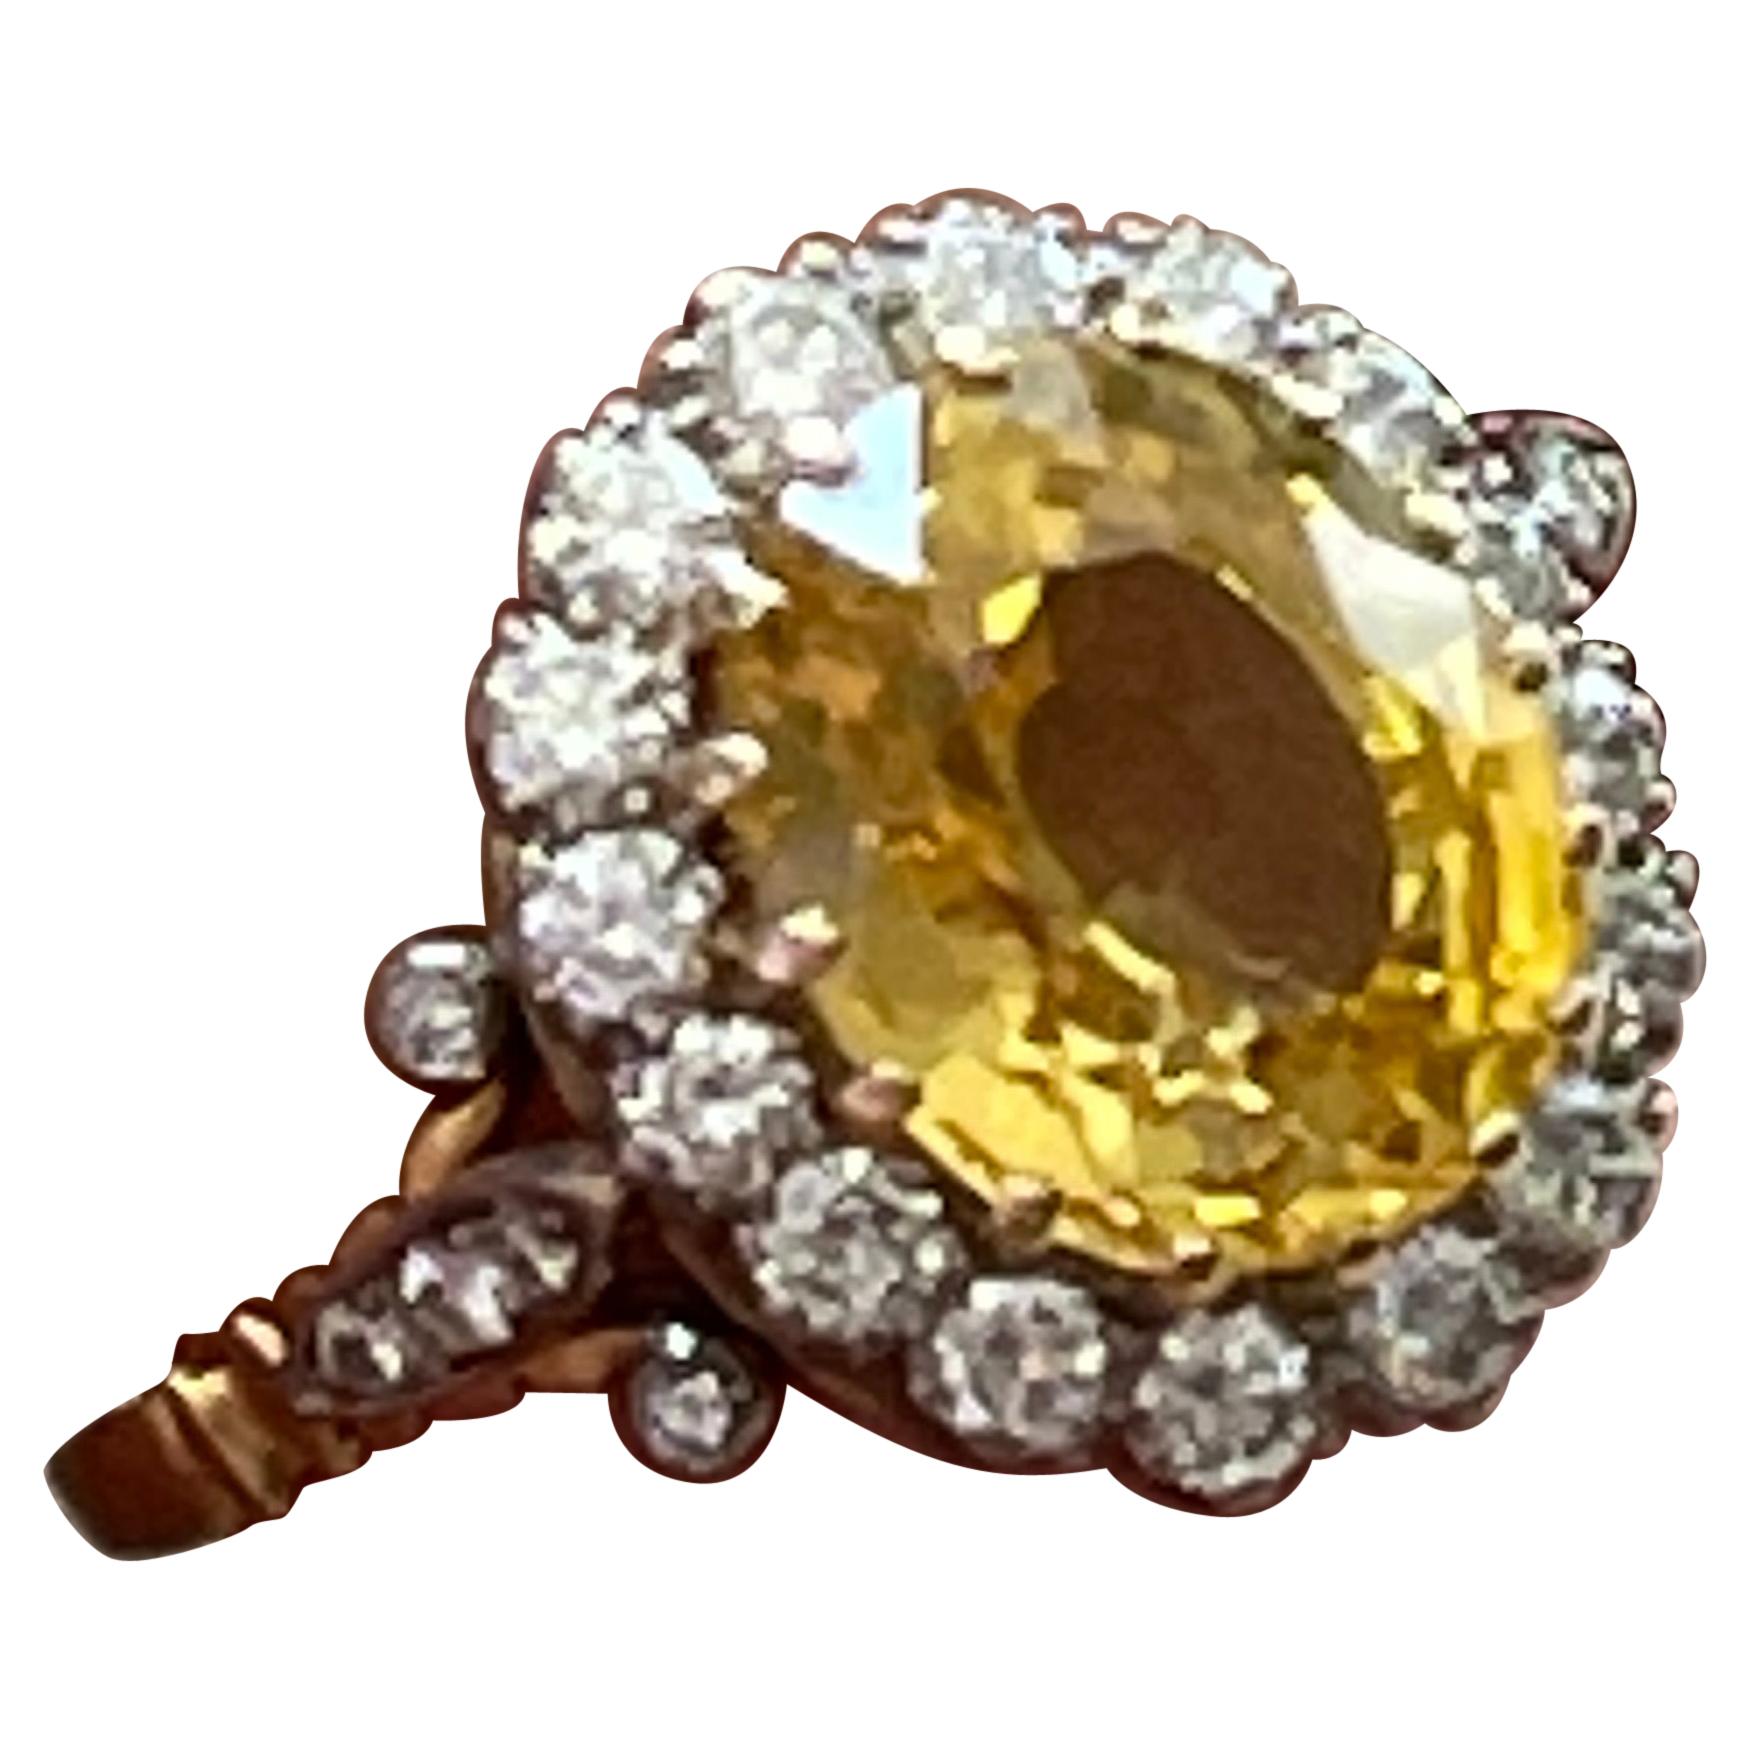 A bright yellow Sapphire is the central point of this classic Vintage Entourage Ring in 18 K yellow Gold. The yellow Sapphire has a weight of approximately 4.80 ct and is surrouded by 26 brilliant cut Diamonds weighing approximately 0.70 ct. 
The